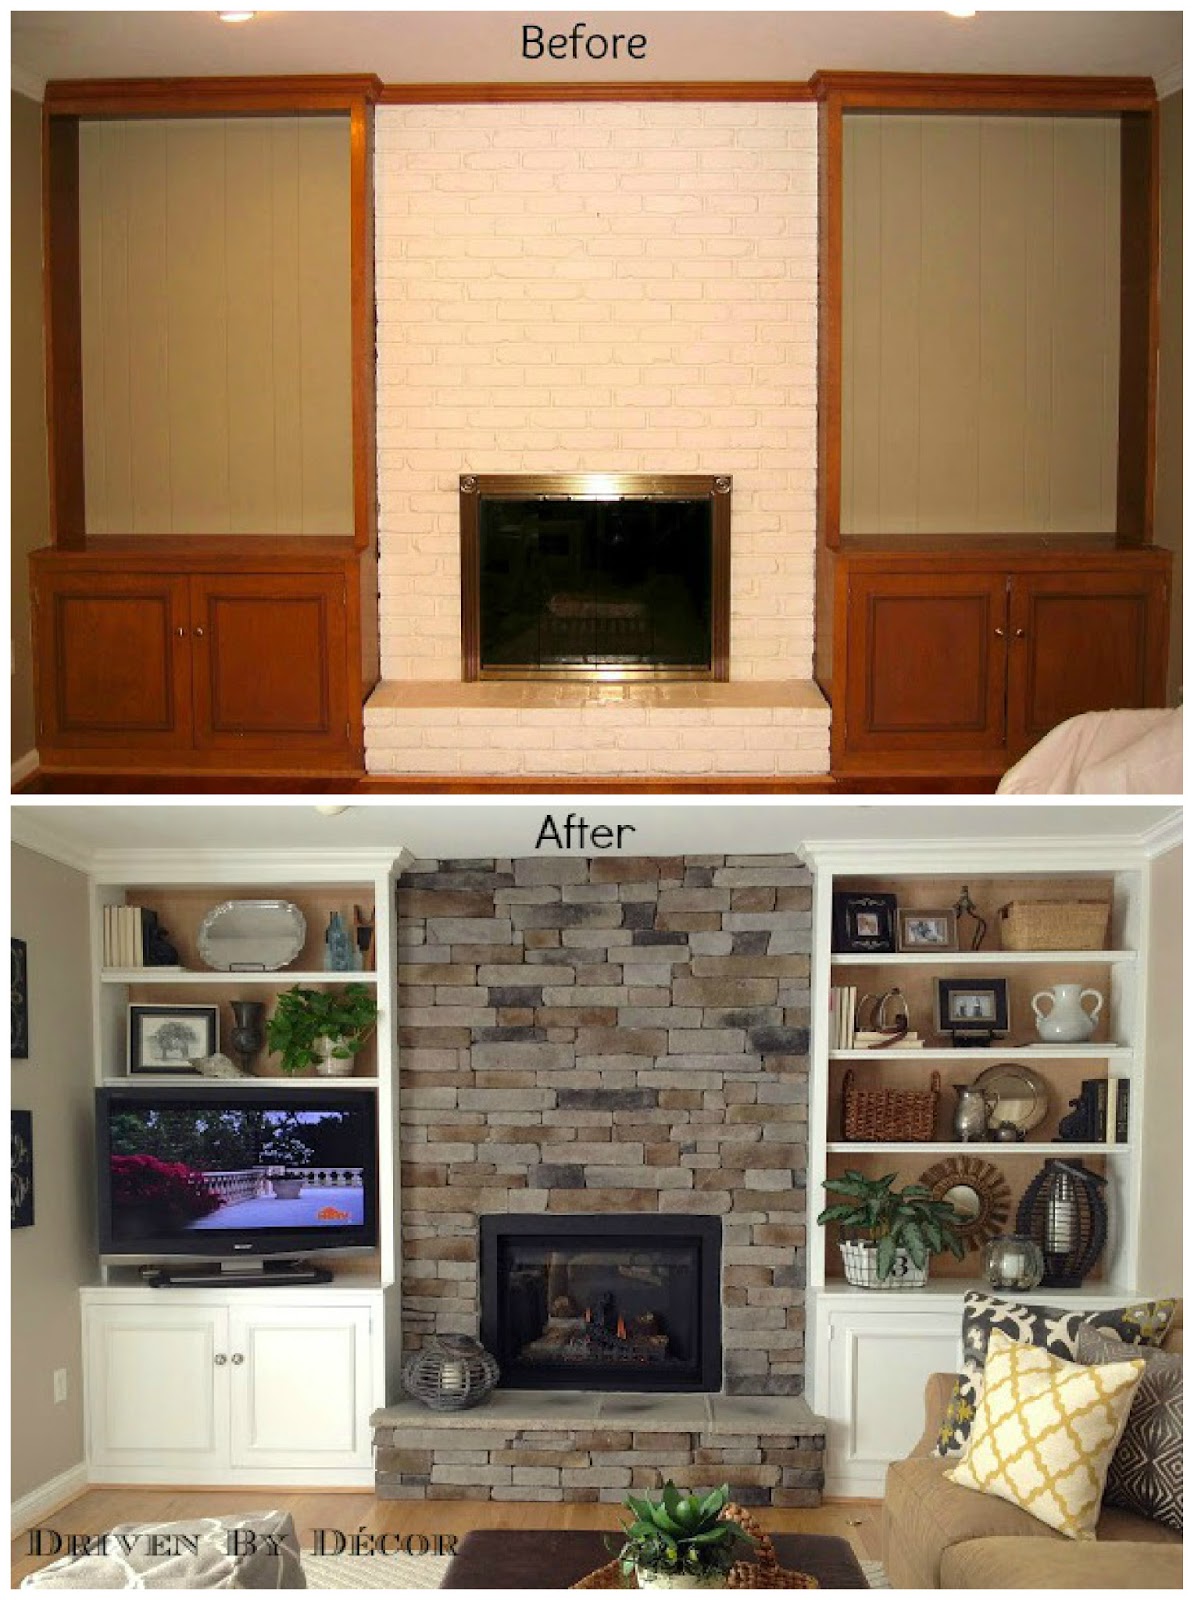 Transforming a Fireplace and Built-in Bookcases - Driven by Decor